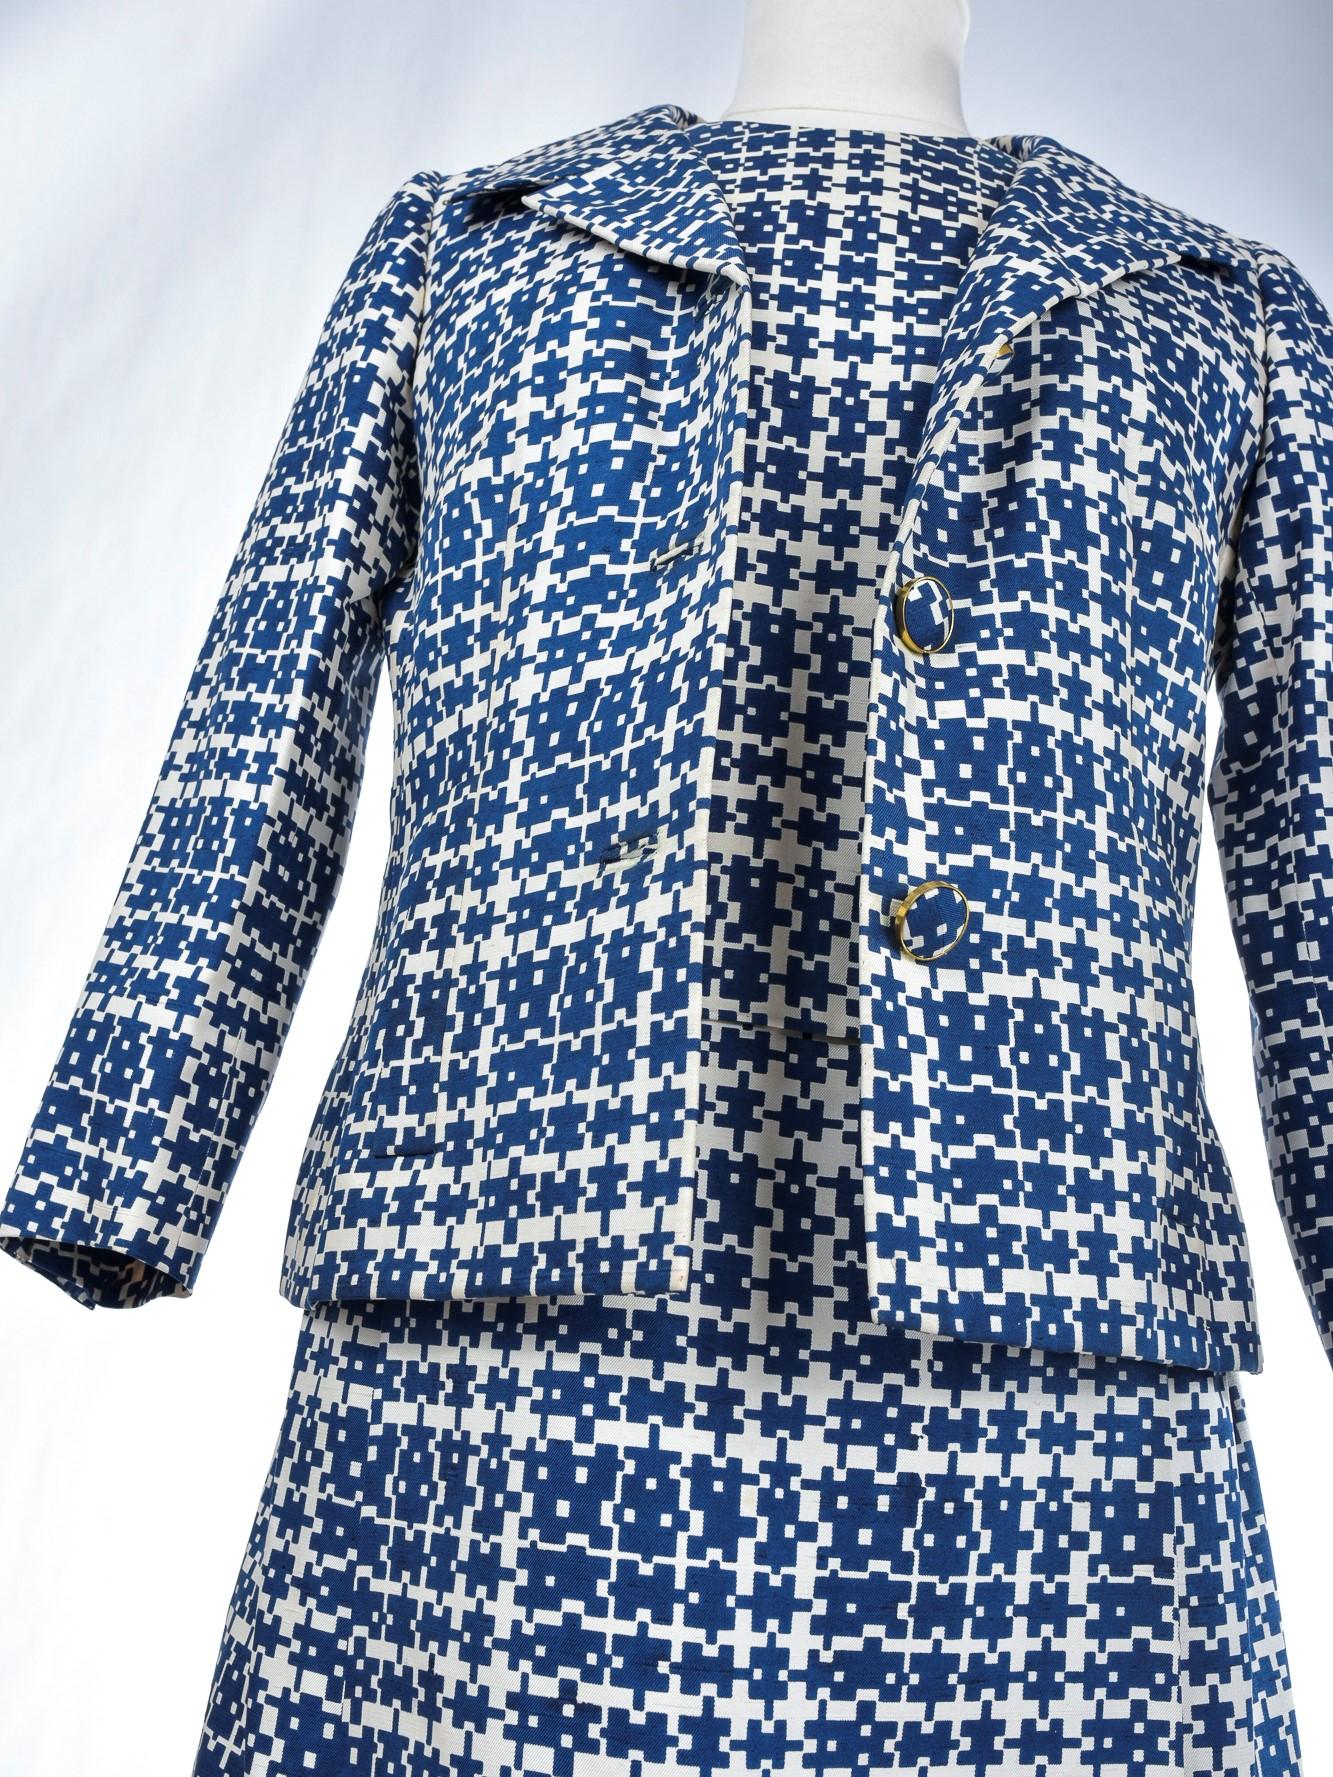 Circa 1956 - 1960

France

Interesting printed silk suit composed of a sleeveless dress and a jacket probably from the early days of Jules-François Crahay for Nina Ricci. Beautiful navy print with geometric labyrinths on a cream silk twill